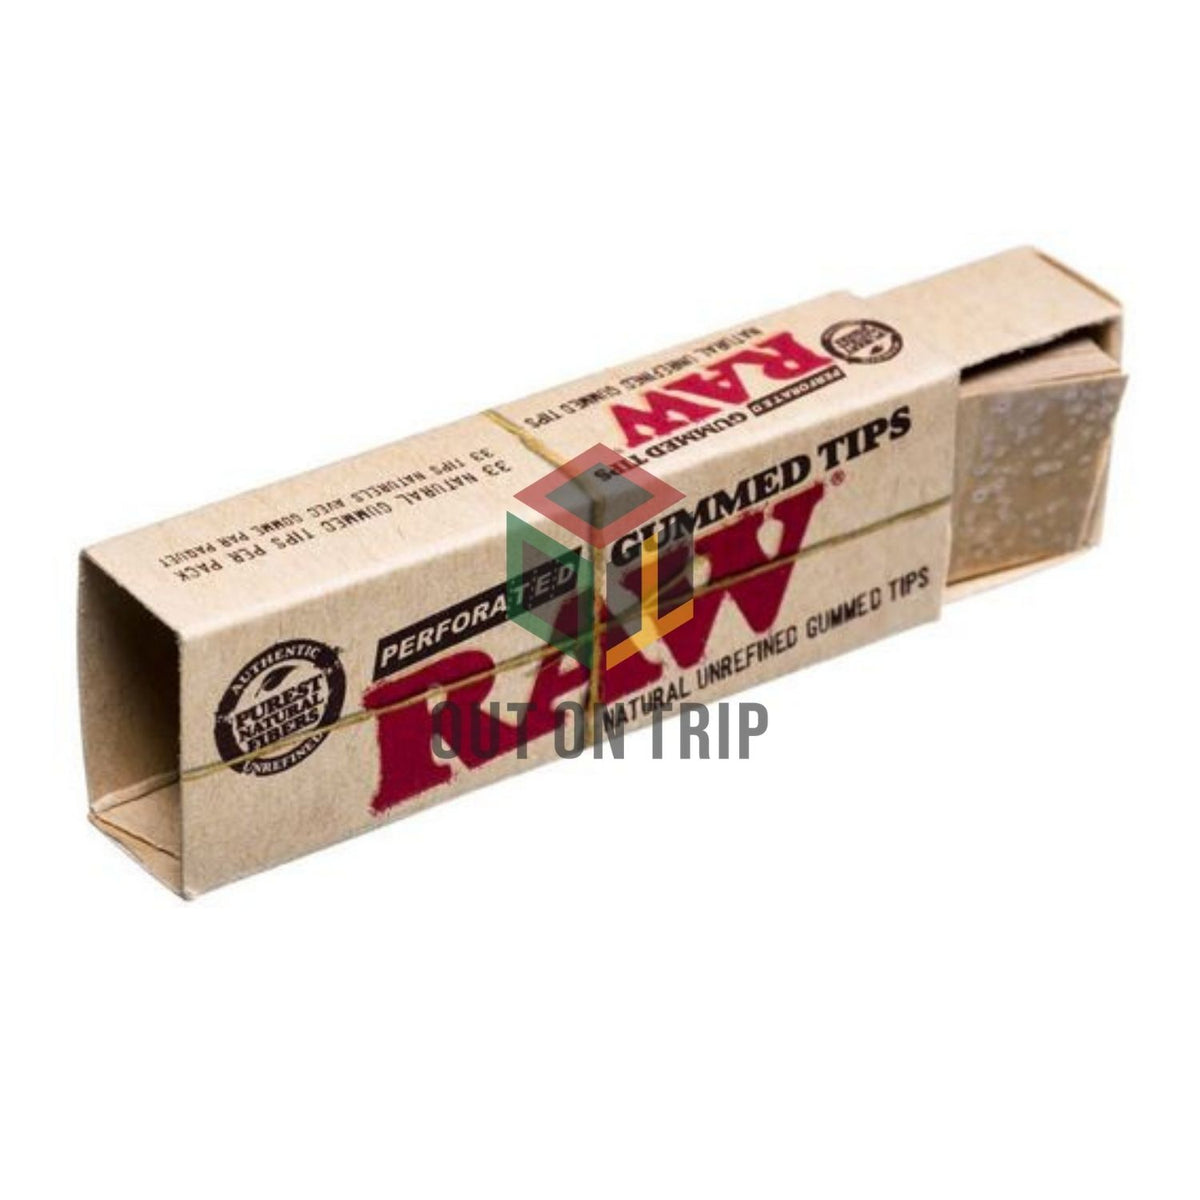 Raw Slim Sized Cotton Filter Rolling Tips for RYO Tobacco